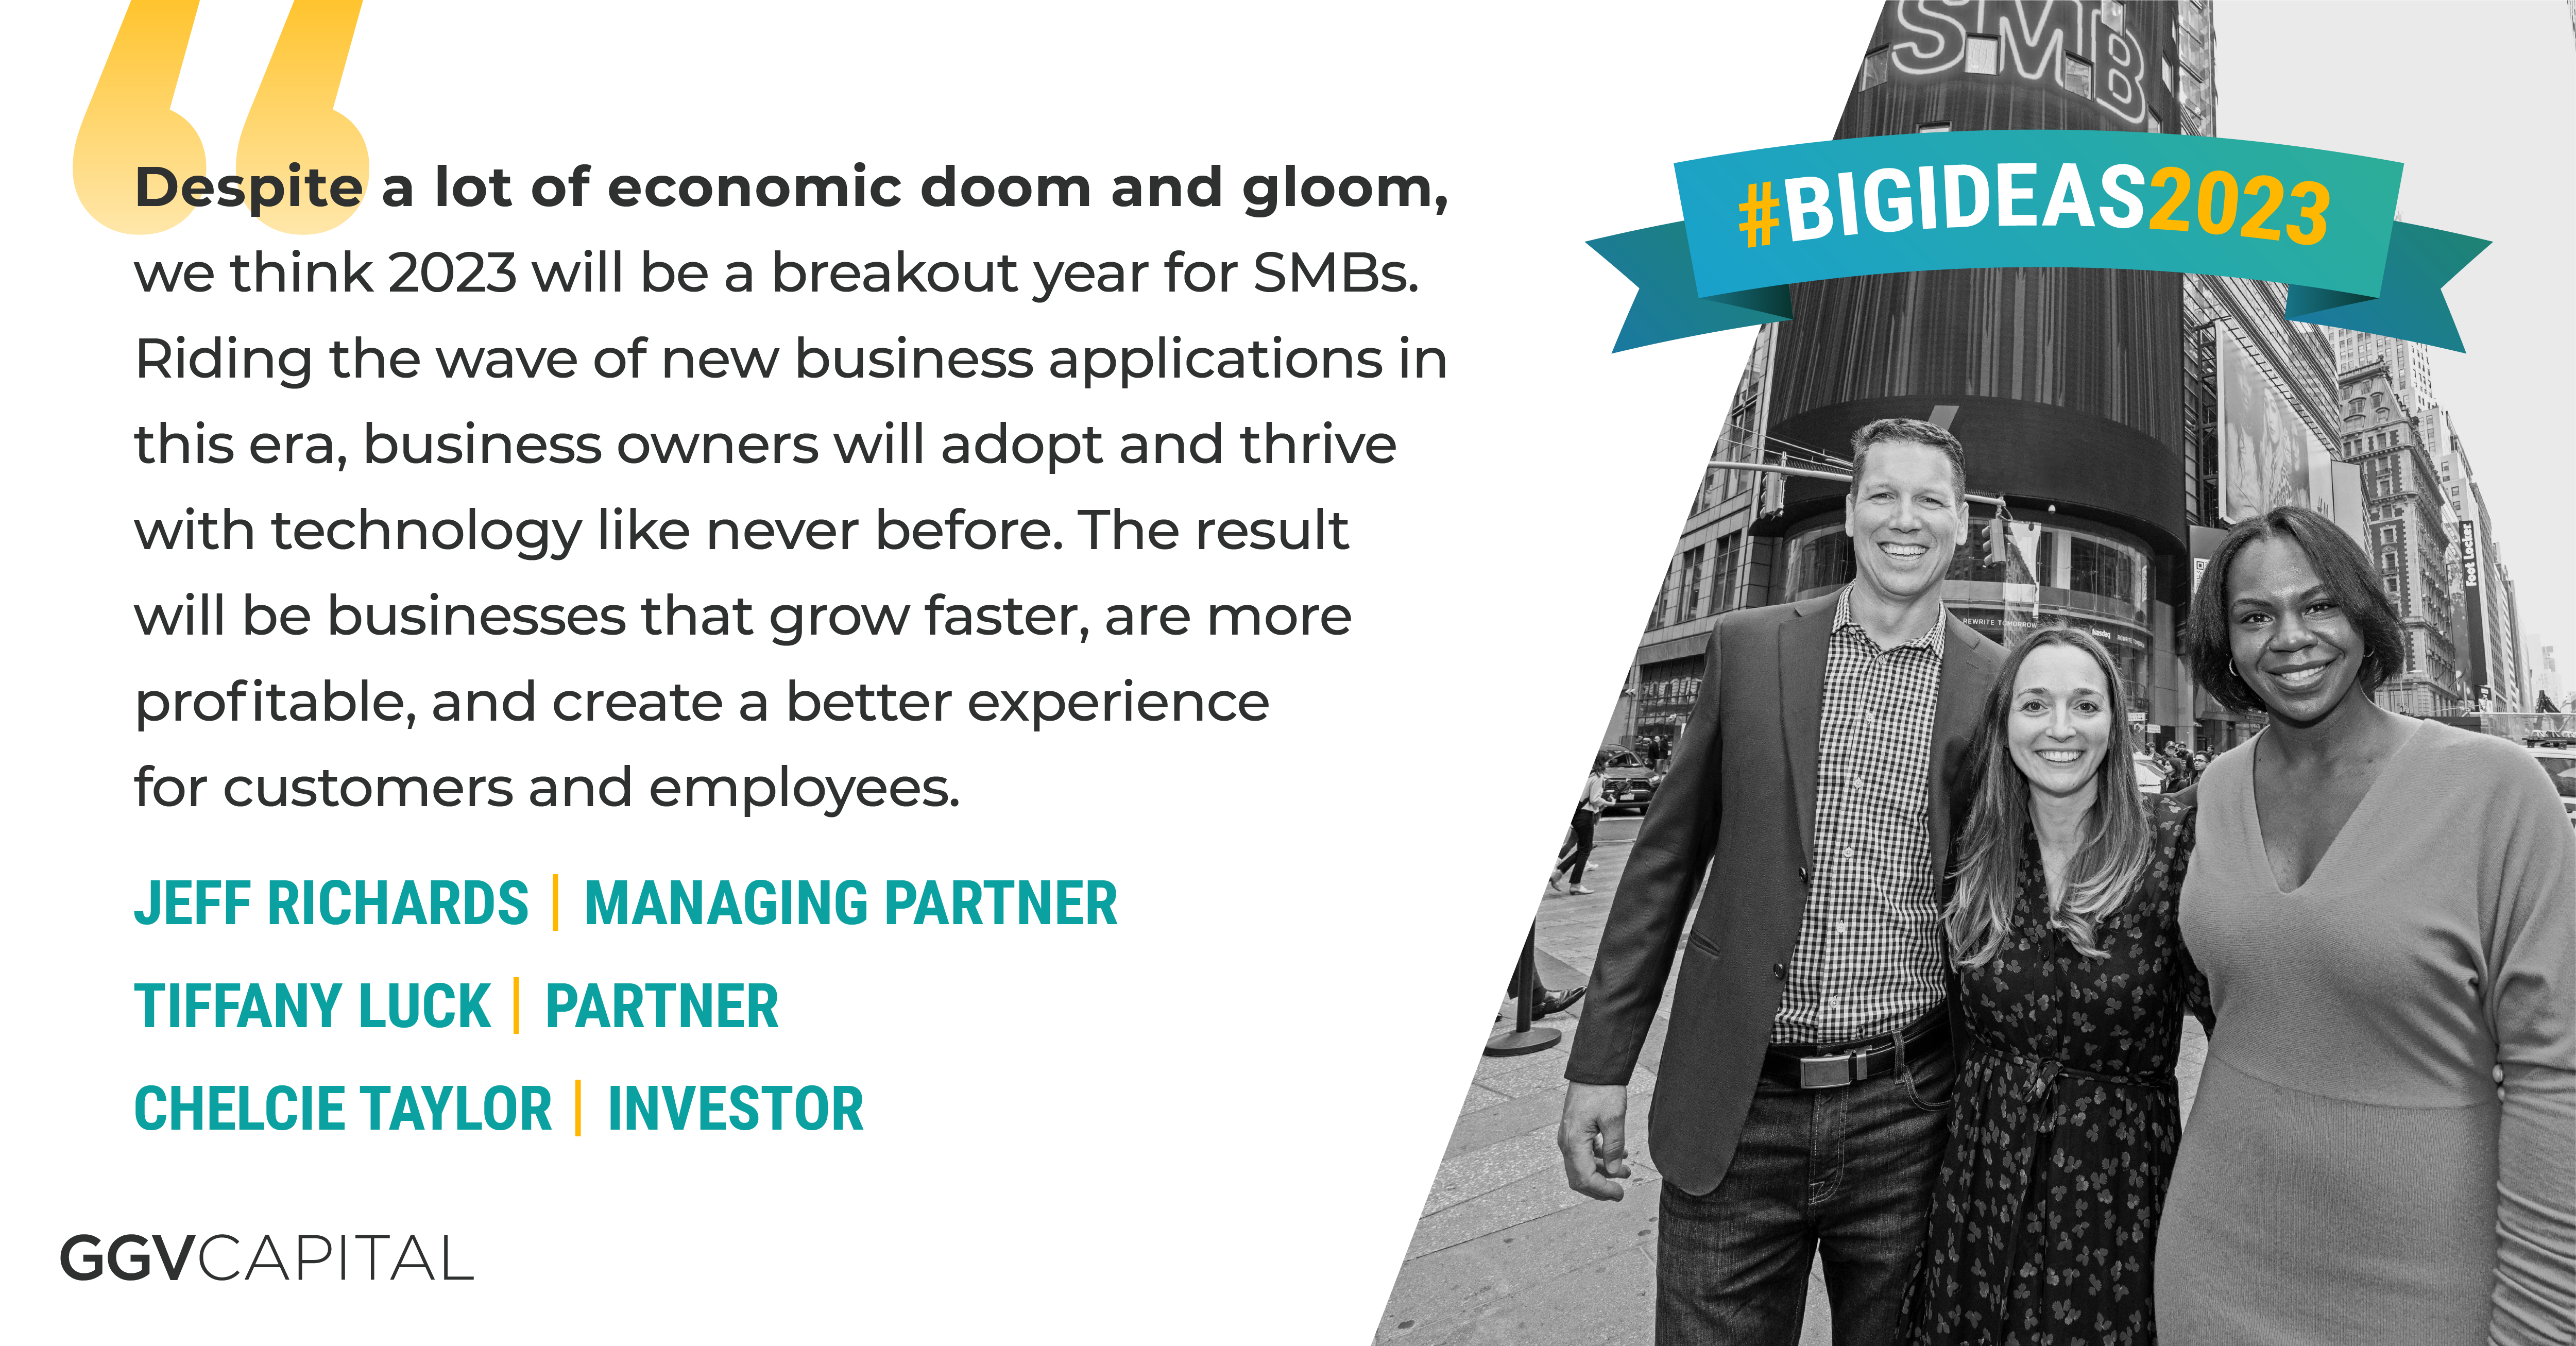 “Despite a lot of economic doom and gloom, we think 2023 will be a breakout year for SMBs. Riding the wave of new business applications in this era, business owners will adopt and thrive with technology like never before. The result will be businesses that grow faster, are more profitable, and create a better experience for customers and employees.” —GGV’s Jeff Richards, Tiffany Luck, and Chelcie Taylor